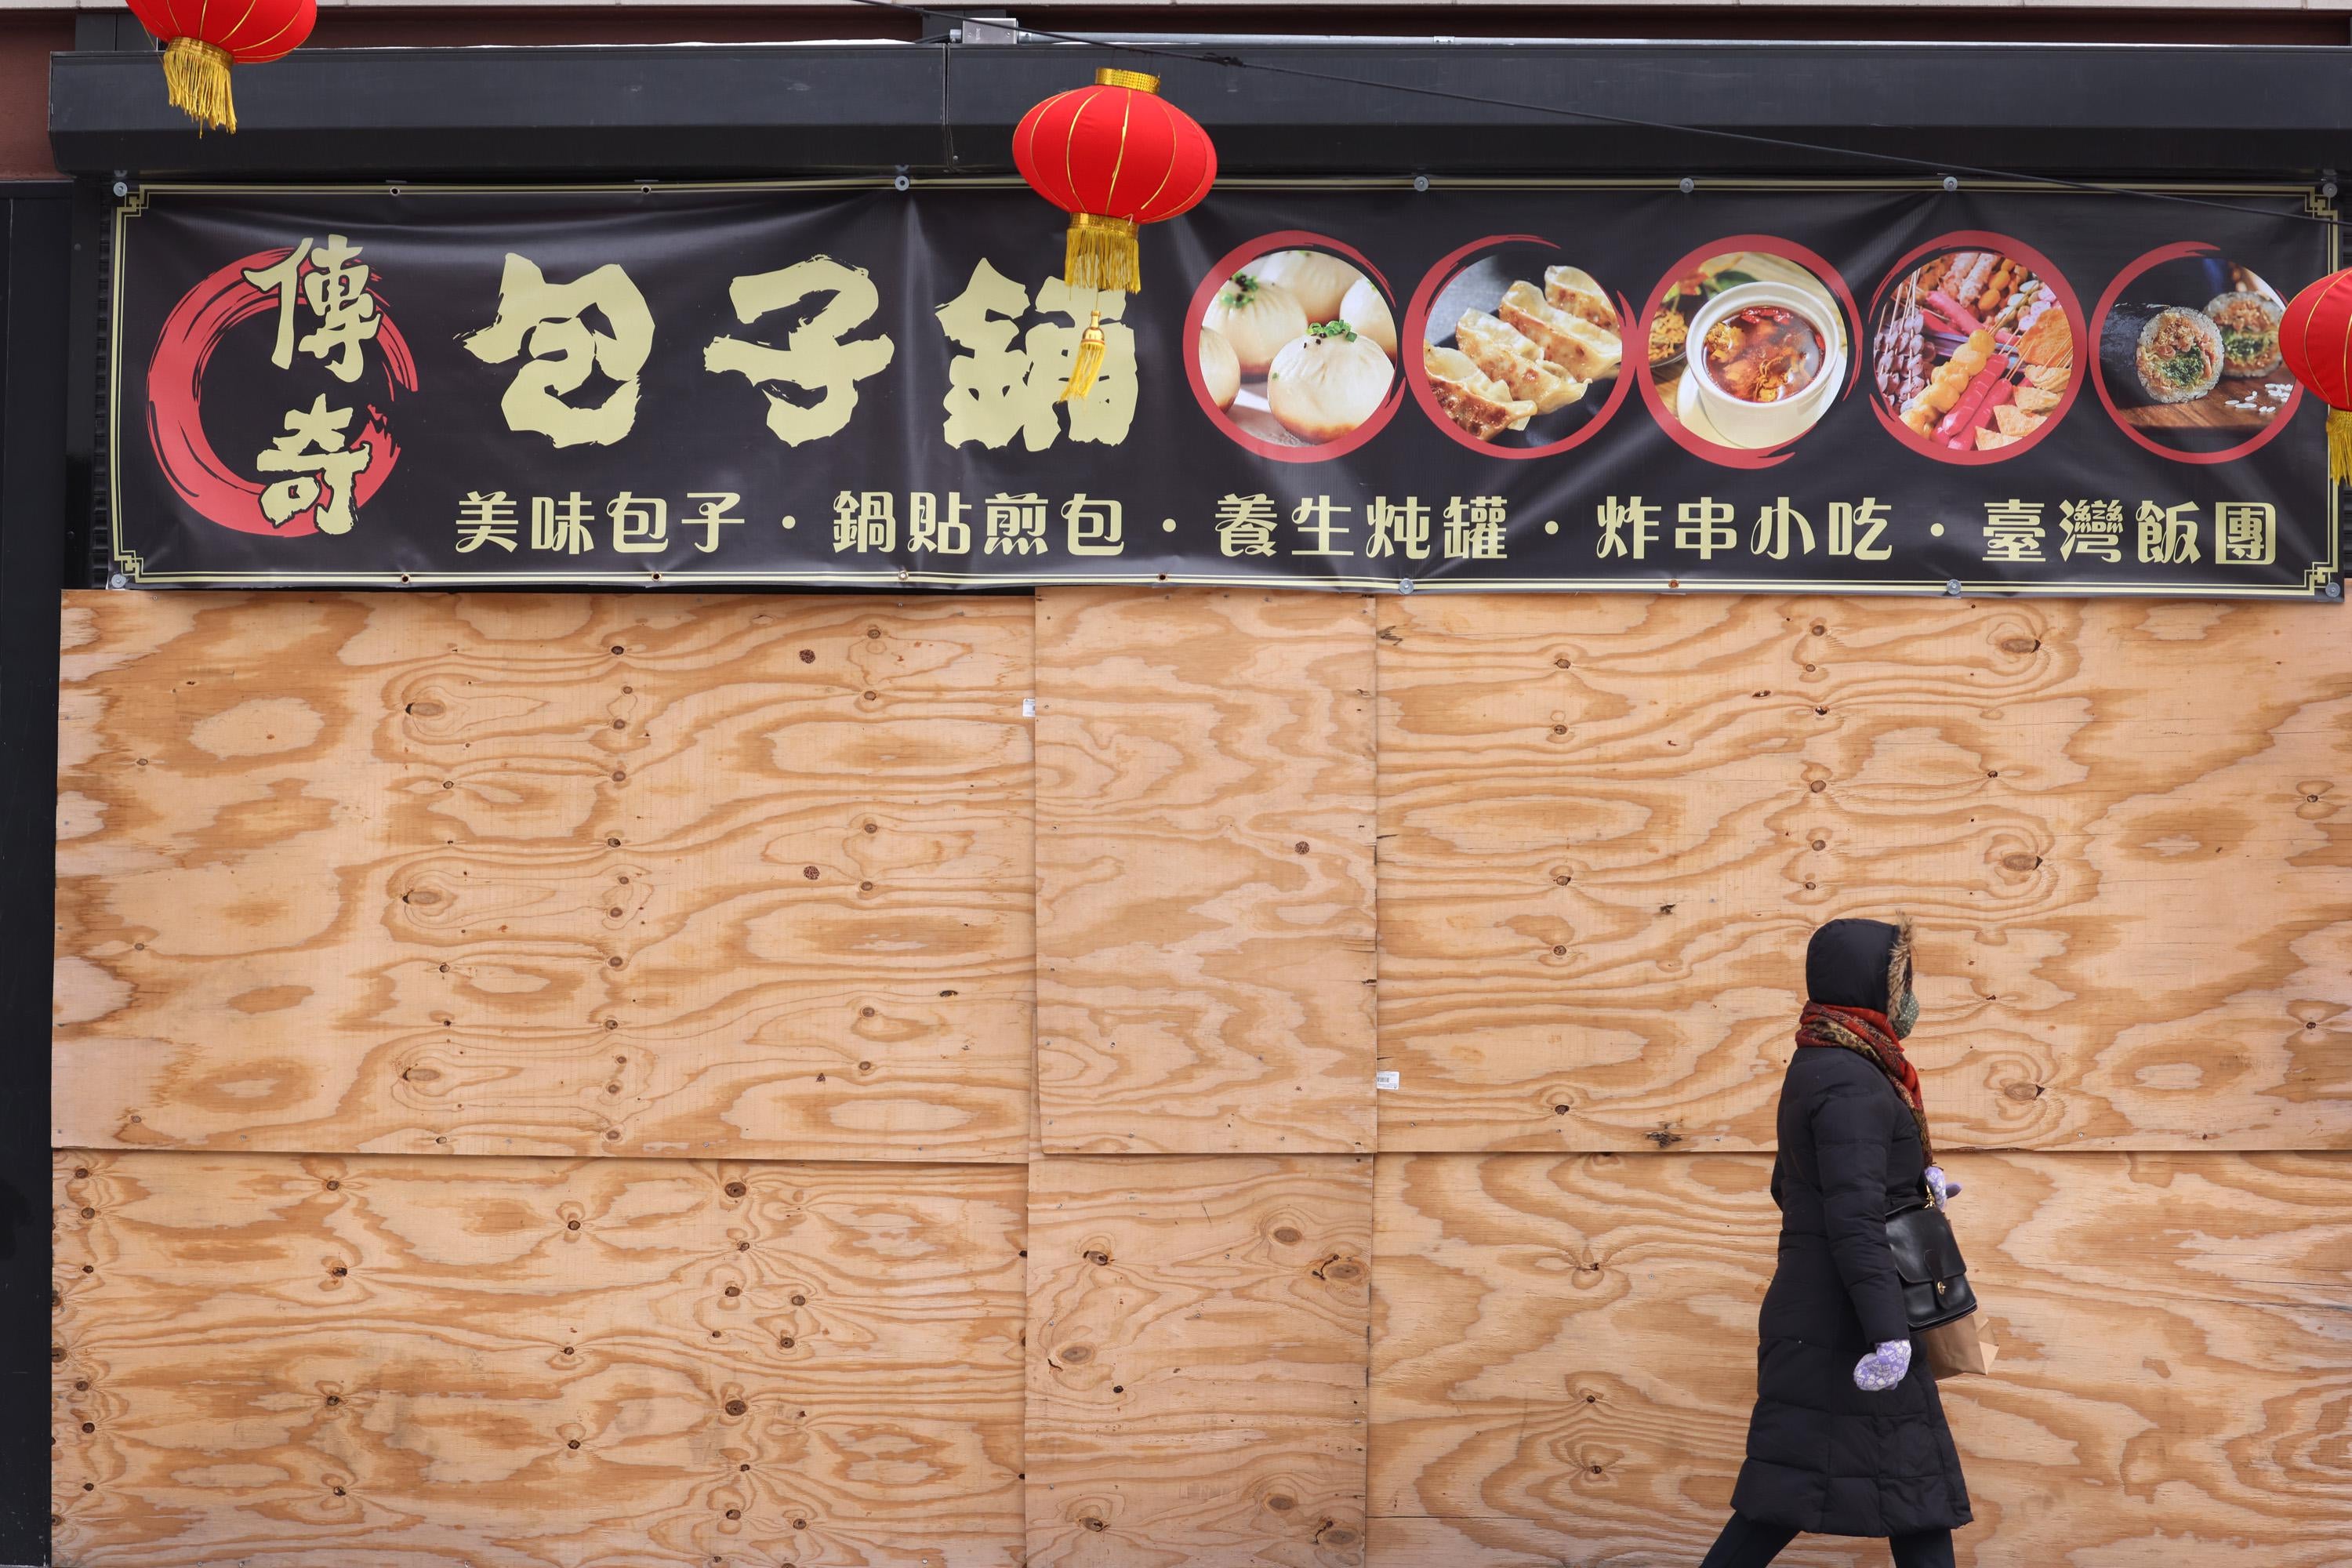 A person in a coat walks past a boarded-up restaurant.